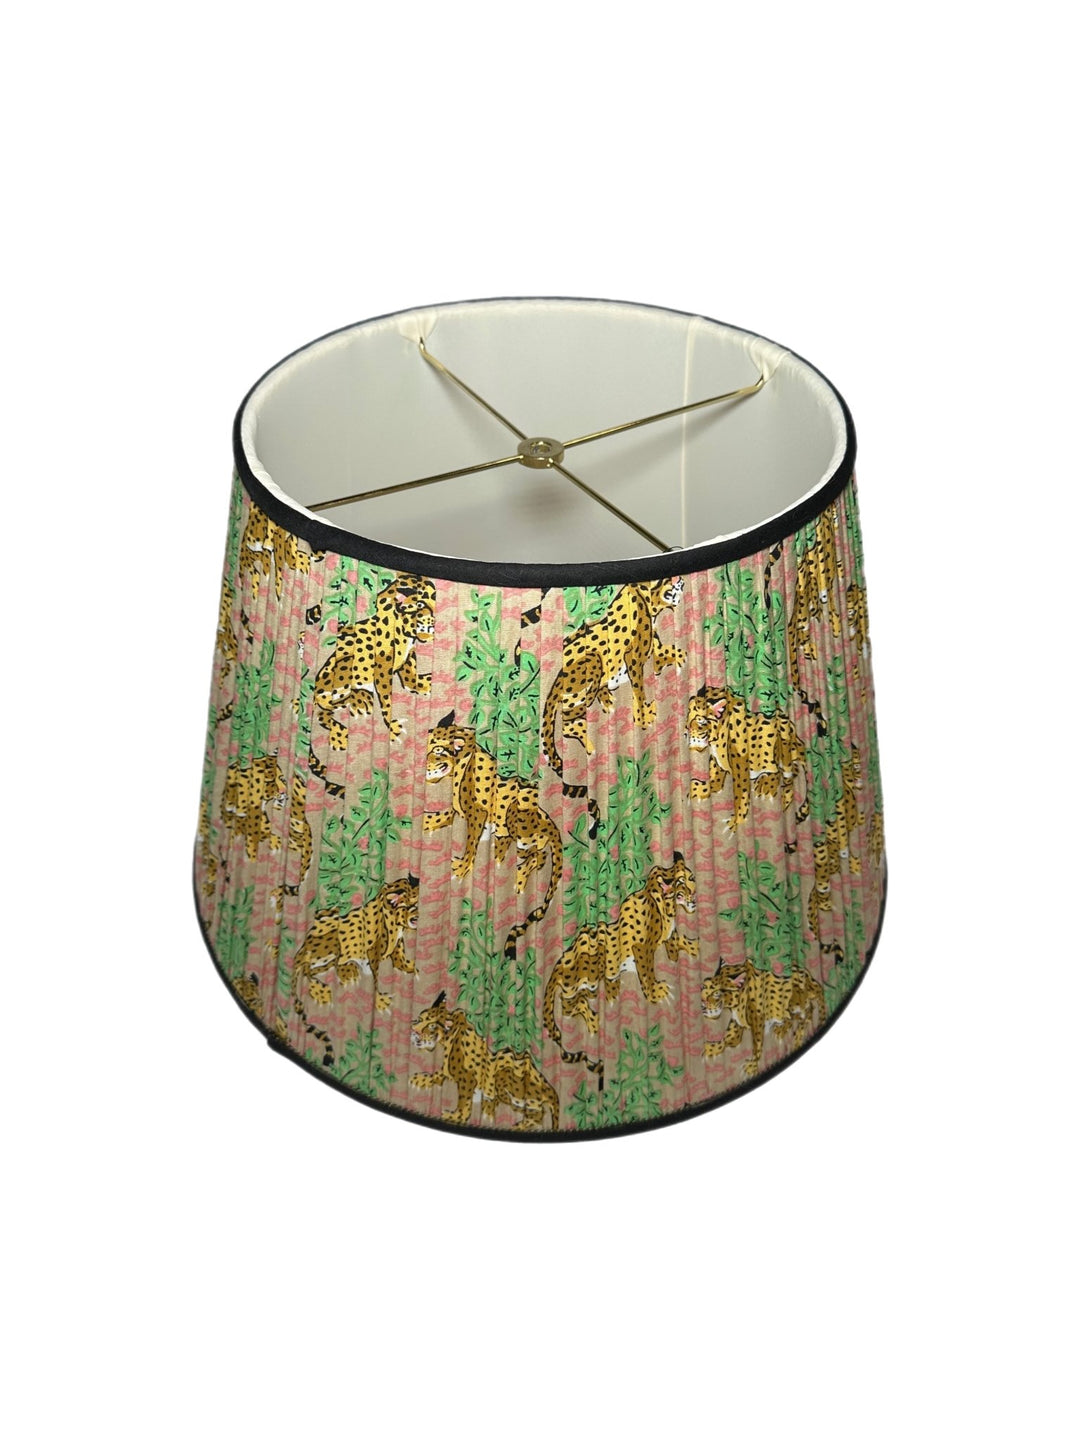 18" Gathered Leopard Print, Black Trim - (2) in stock - Lux Lamp Shades